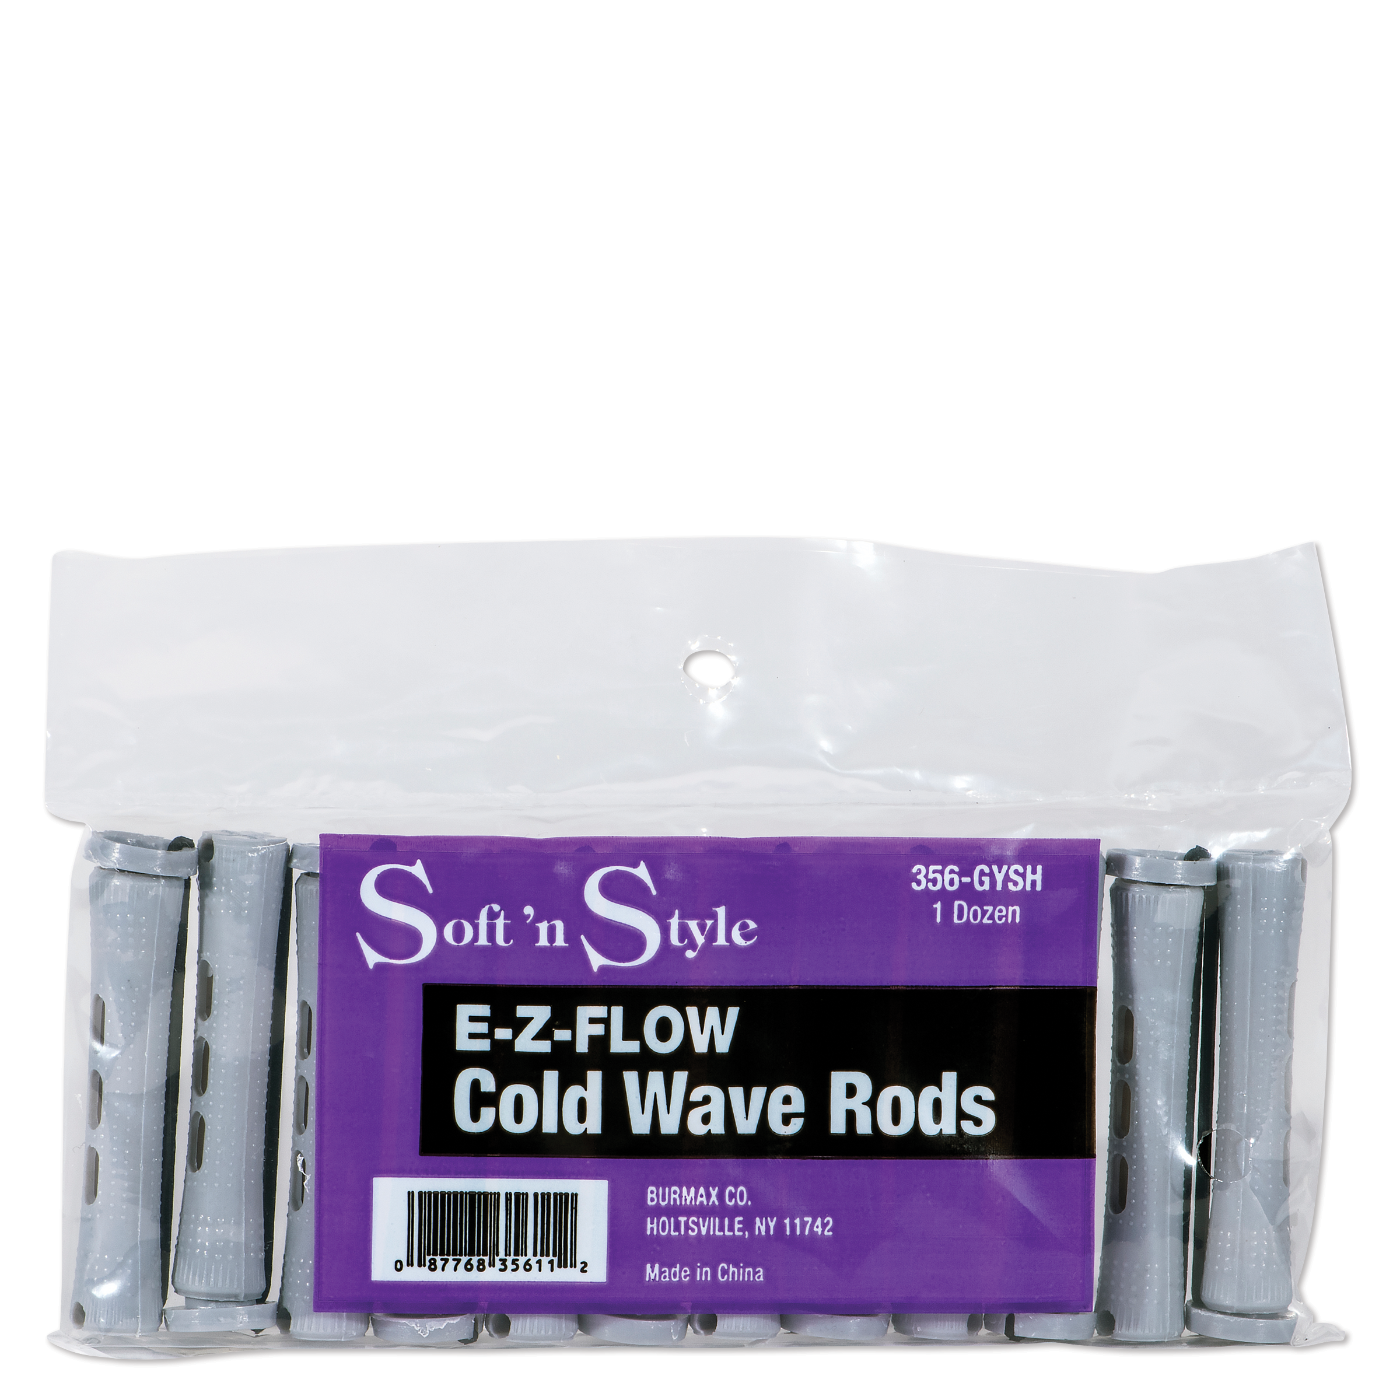 Soft n' Style Concave Cold Wave Rods, Short Gray, pack of 12 #356-GYSH